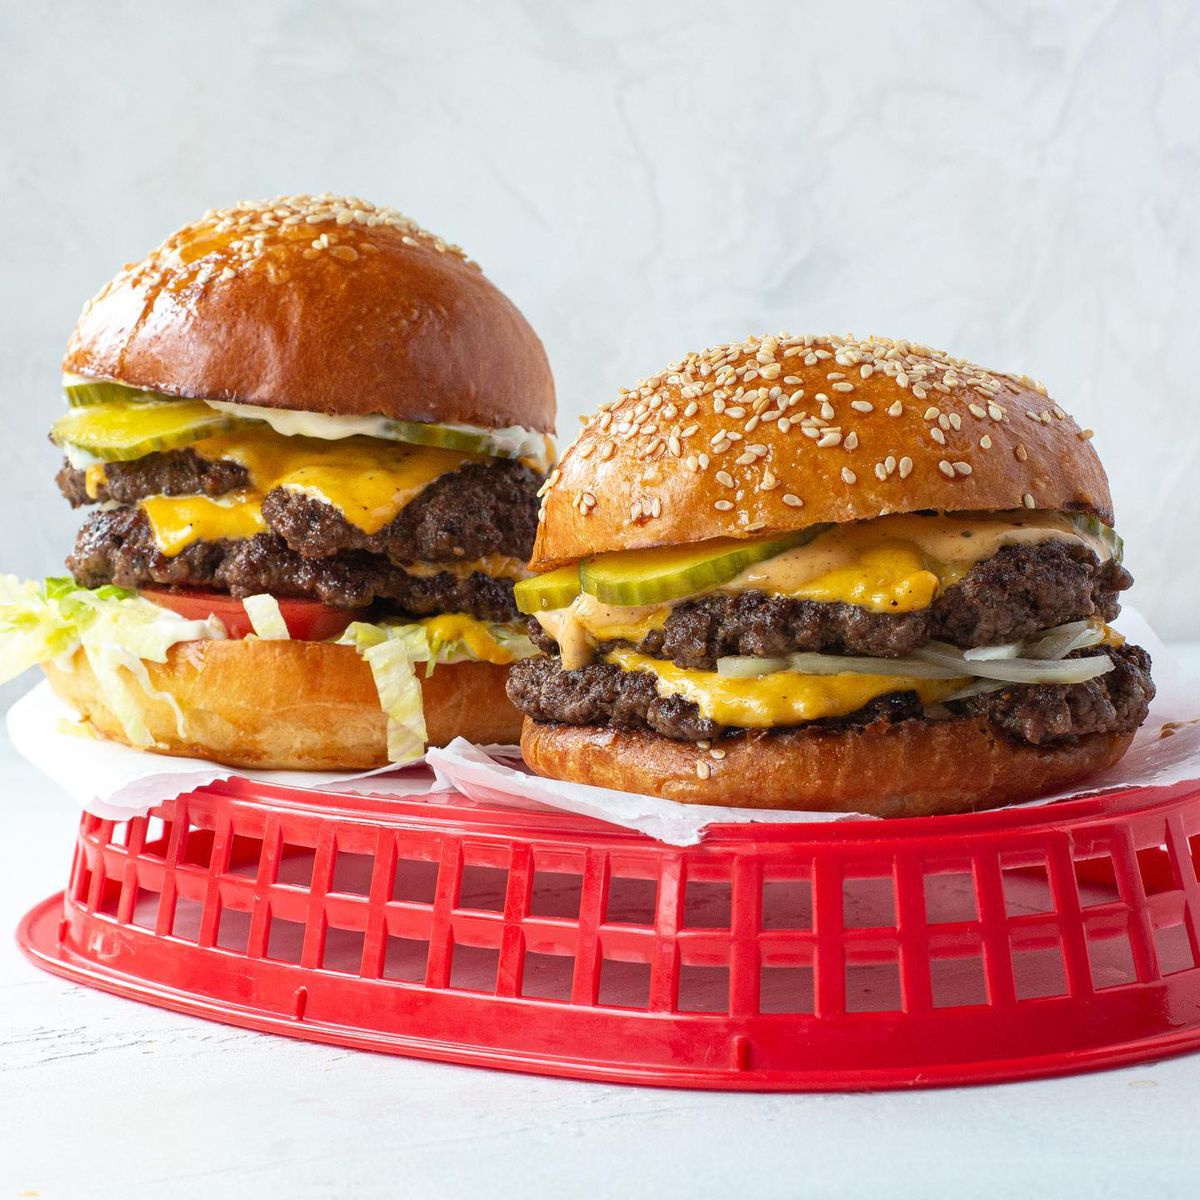 Two double cheeseburgers with pickles, onions, lettuce, and tomato atop an upside down red basket